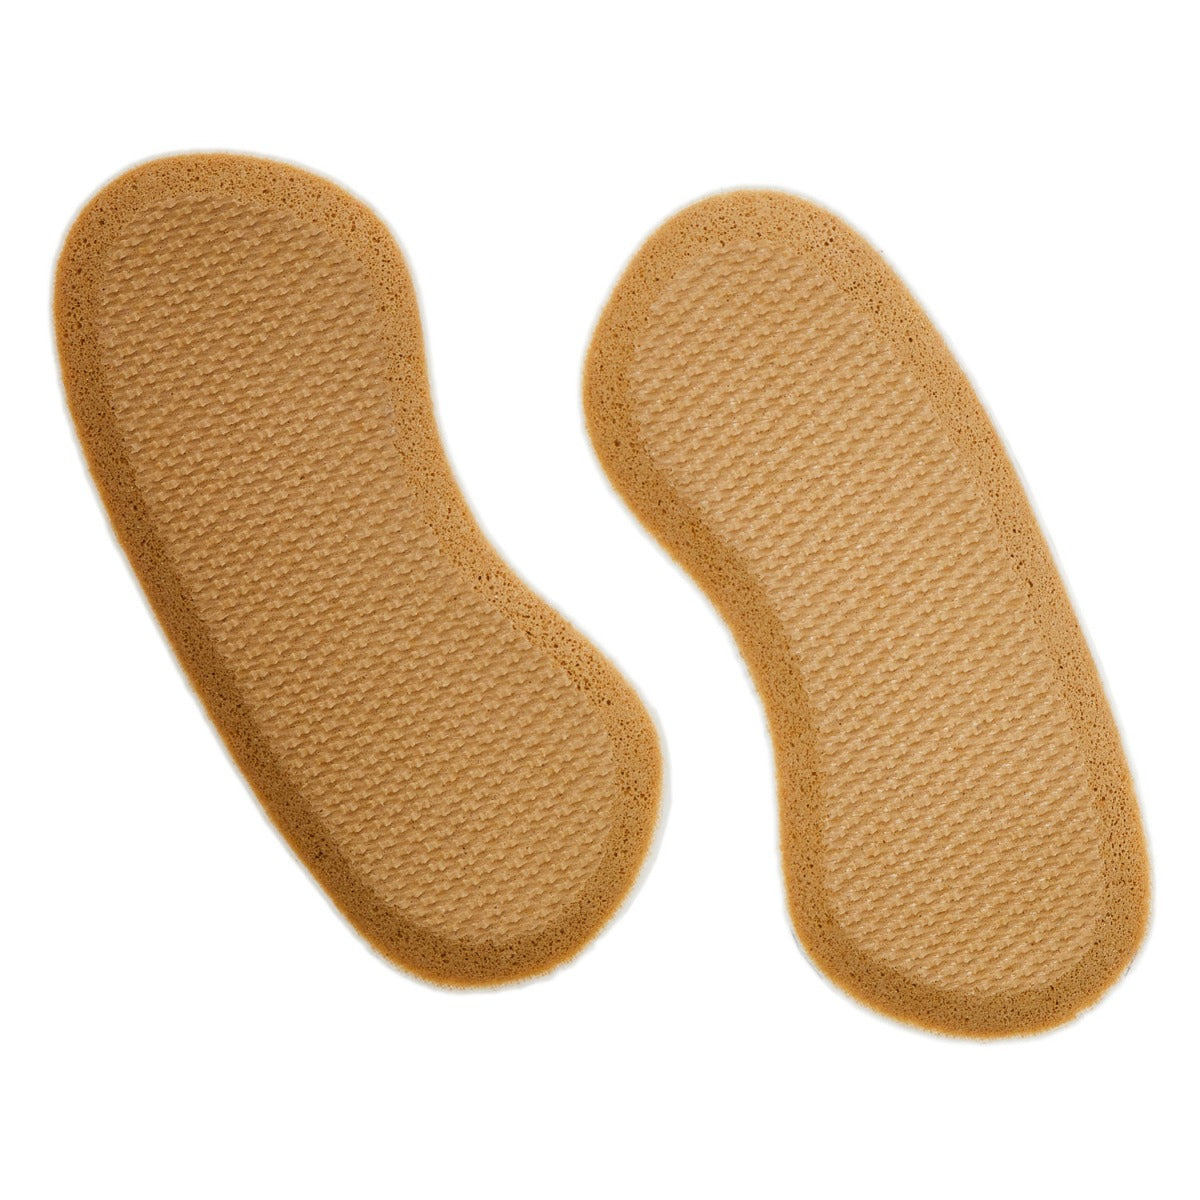 A pair of brown shoe soles with KirbyAllison.com Rubber Heel Grips to prevent sliding.